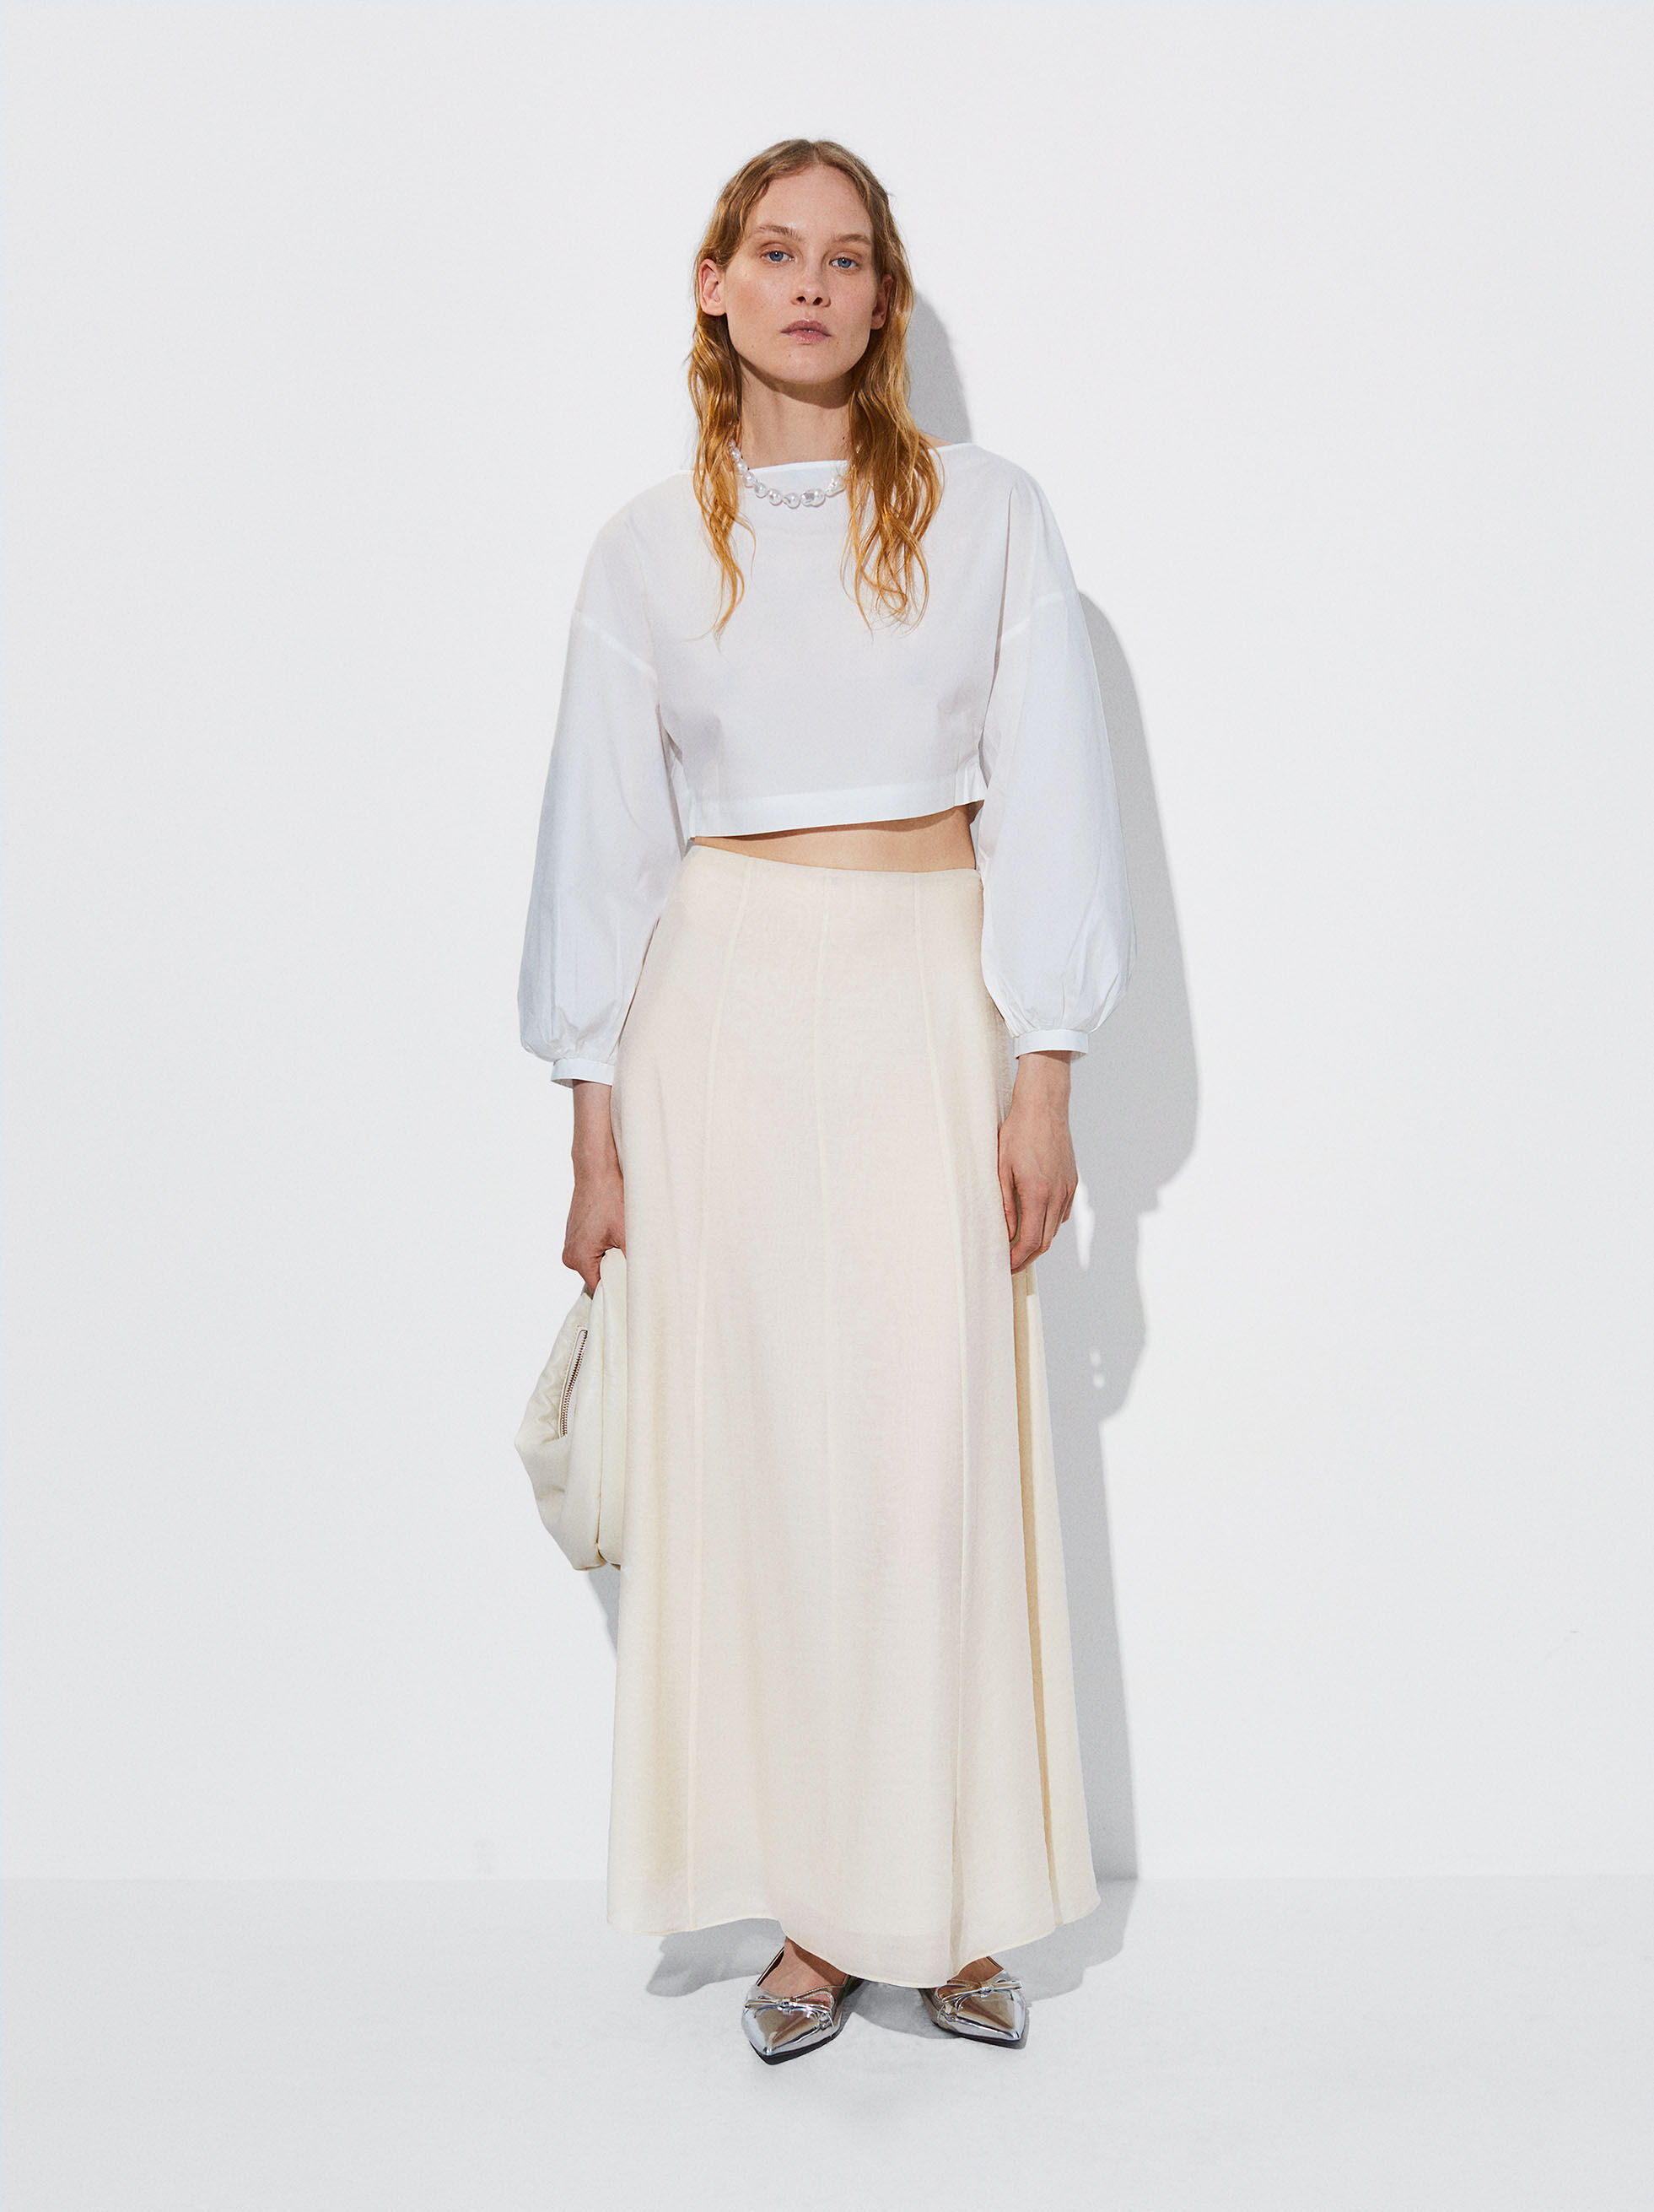 Glamour — 5 ways to wear a maxi skirt in winter, a la Jenna...